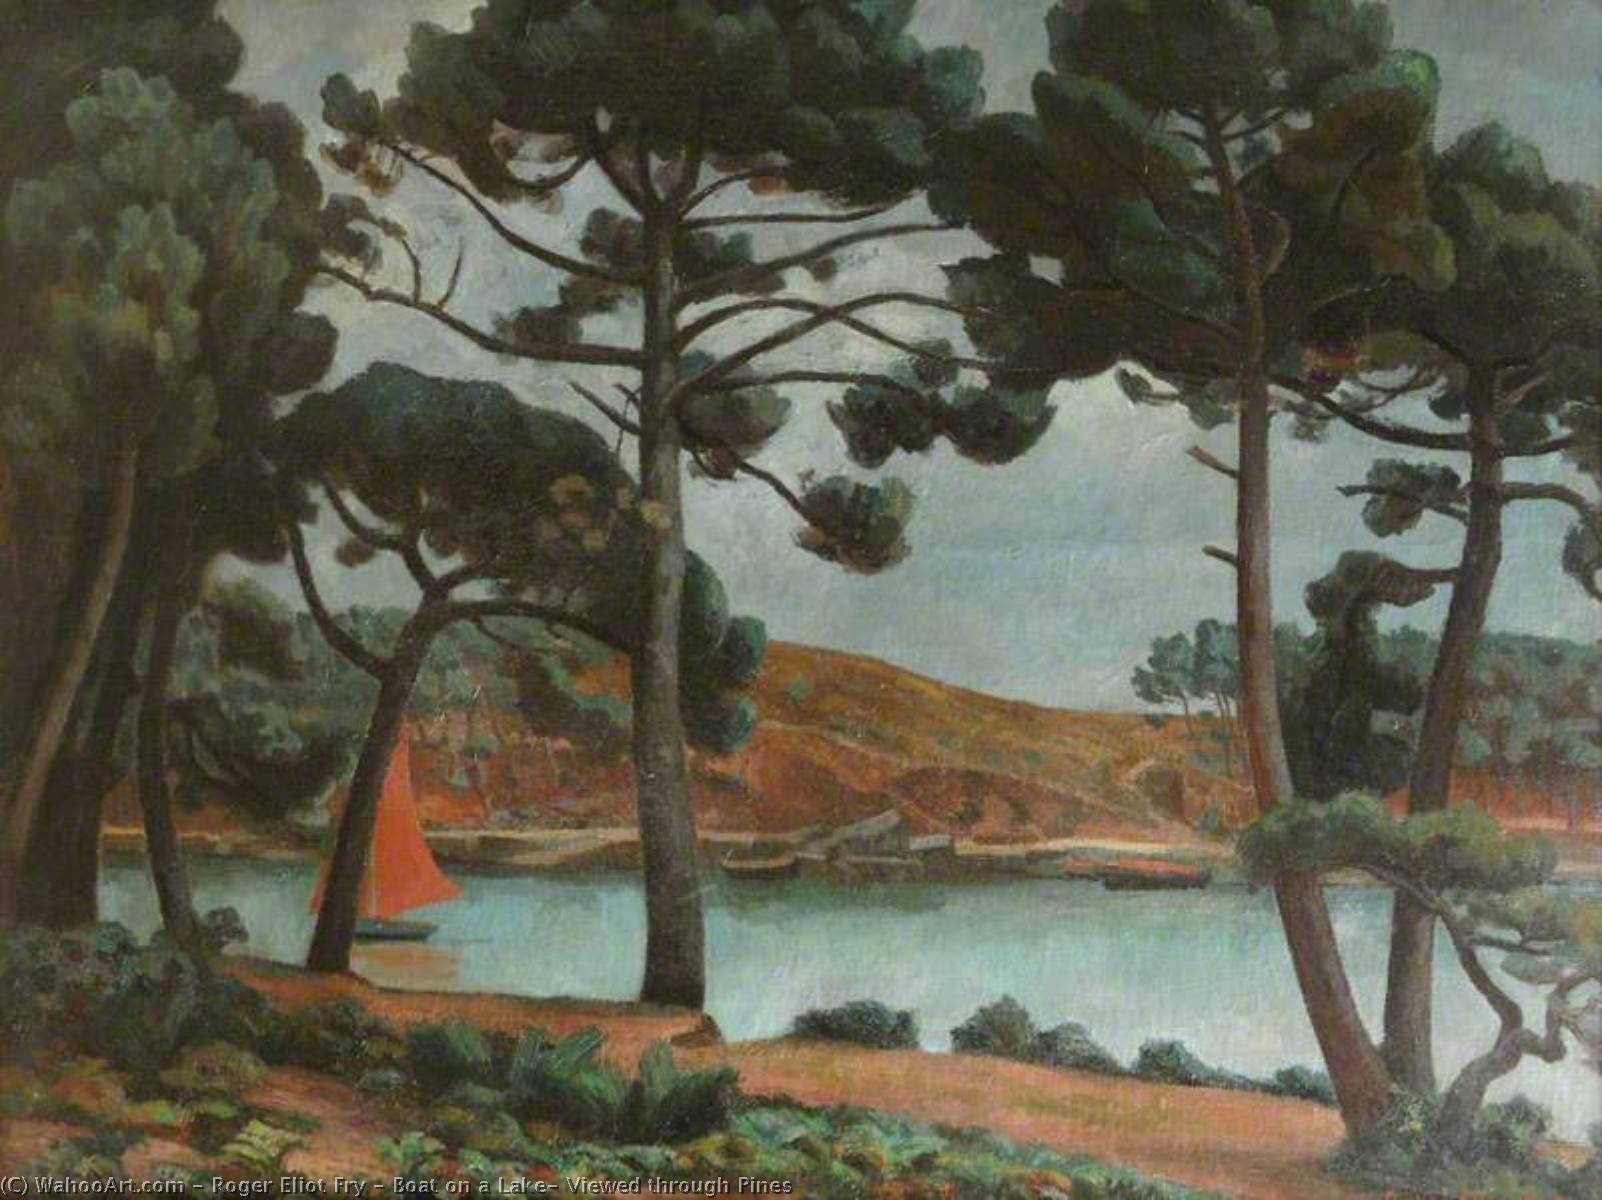 Order Paintings Reproductions Boat on a Lake, Viewed through Pines, 1920 by Roger Eliot Fry (1866-1934) | ArtsDot.com